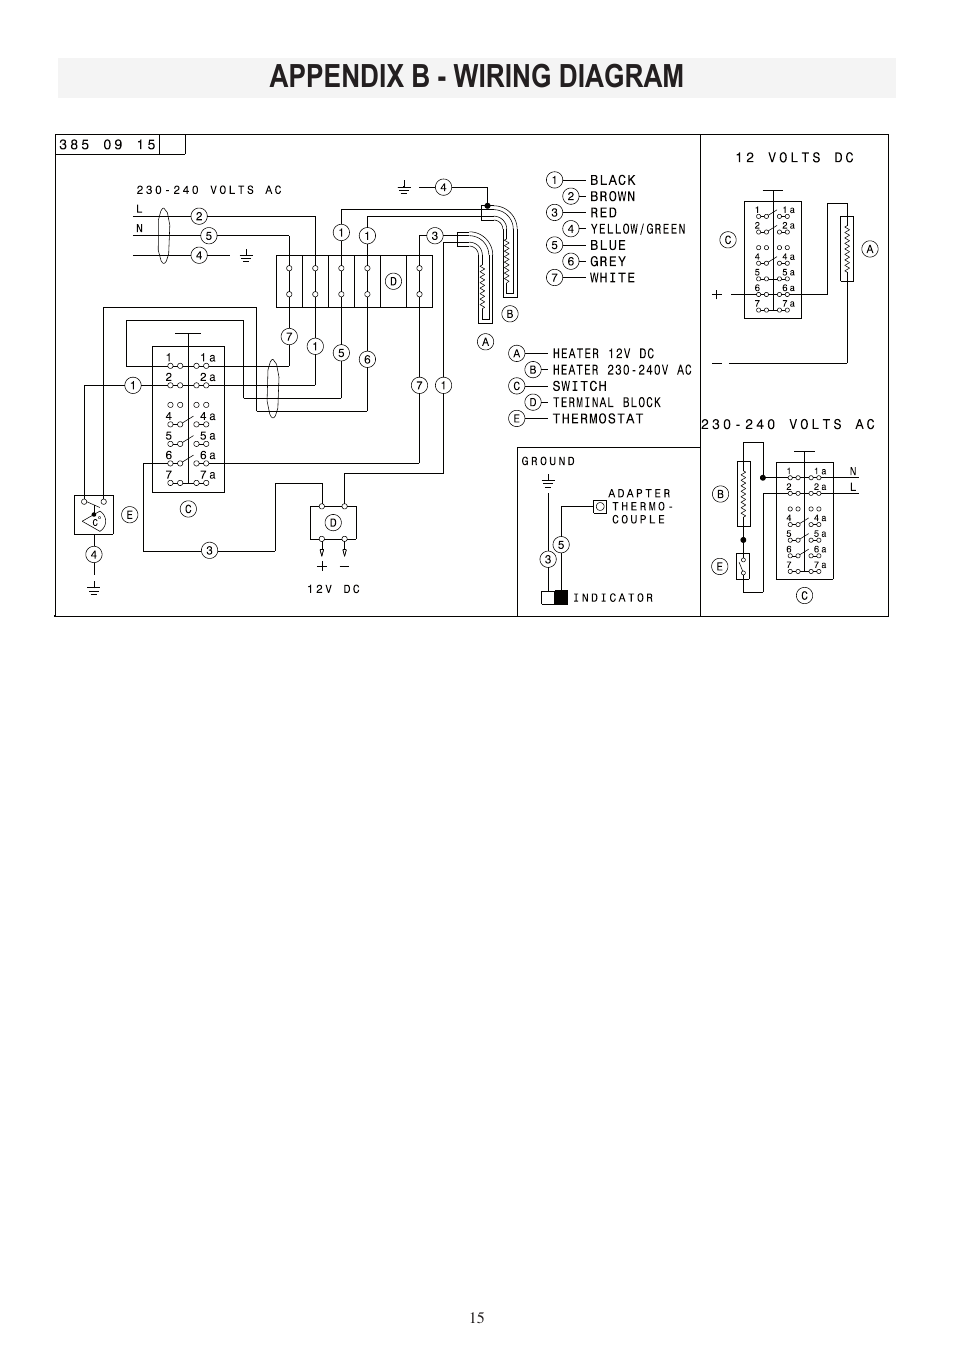 Appendix b - wiring diagram | Dometic RM2553 User Manual | Page 15 / 16